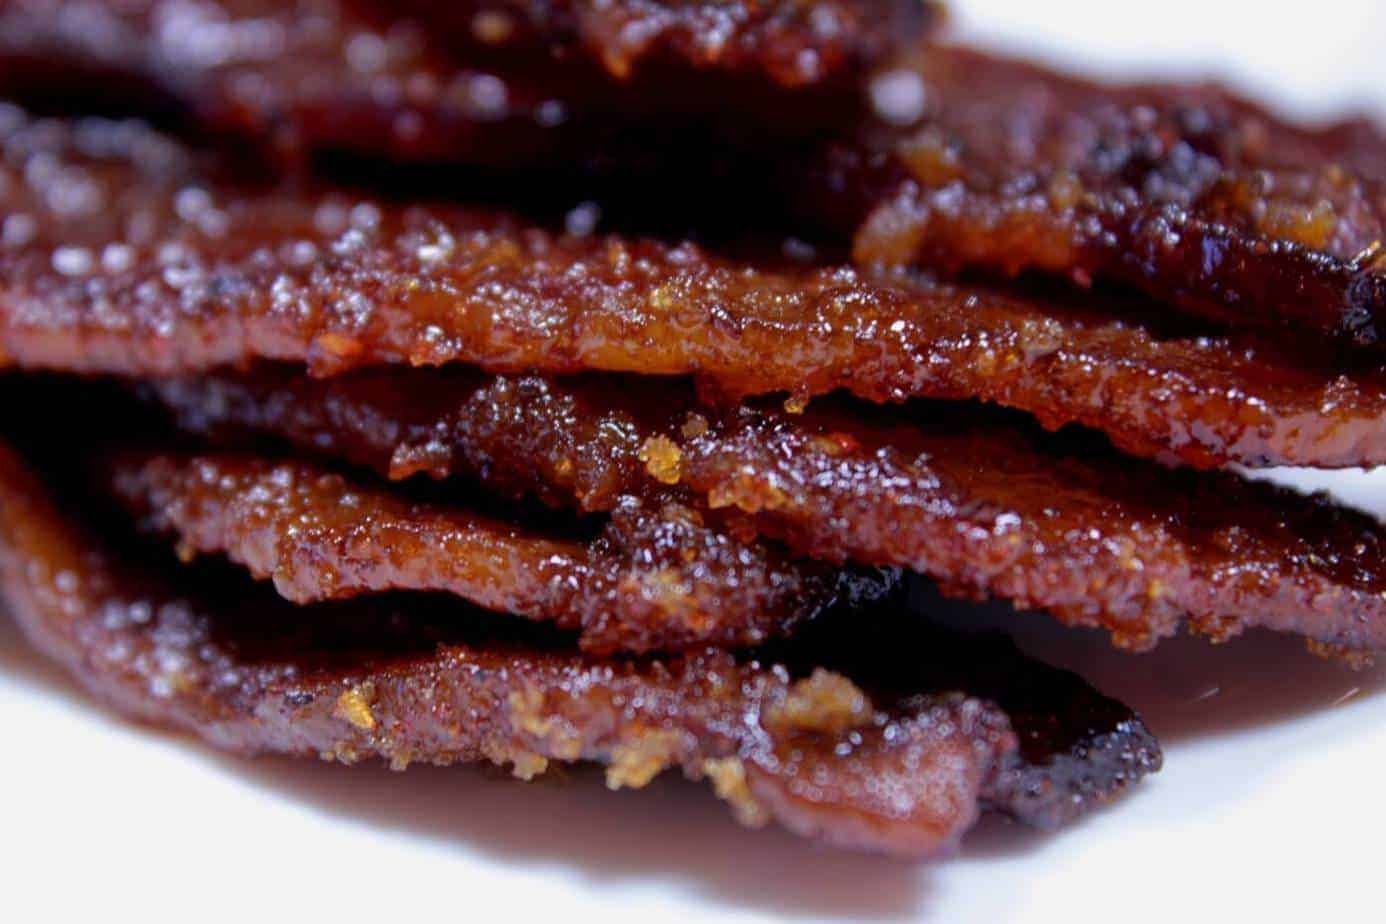 Smoked Bacon Candy (aka. Pig Candy or Candied Bacon)